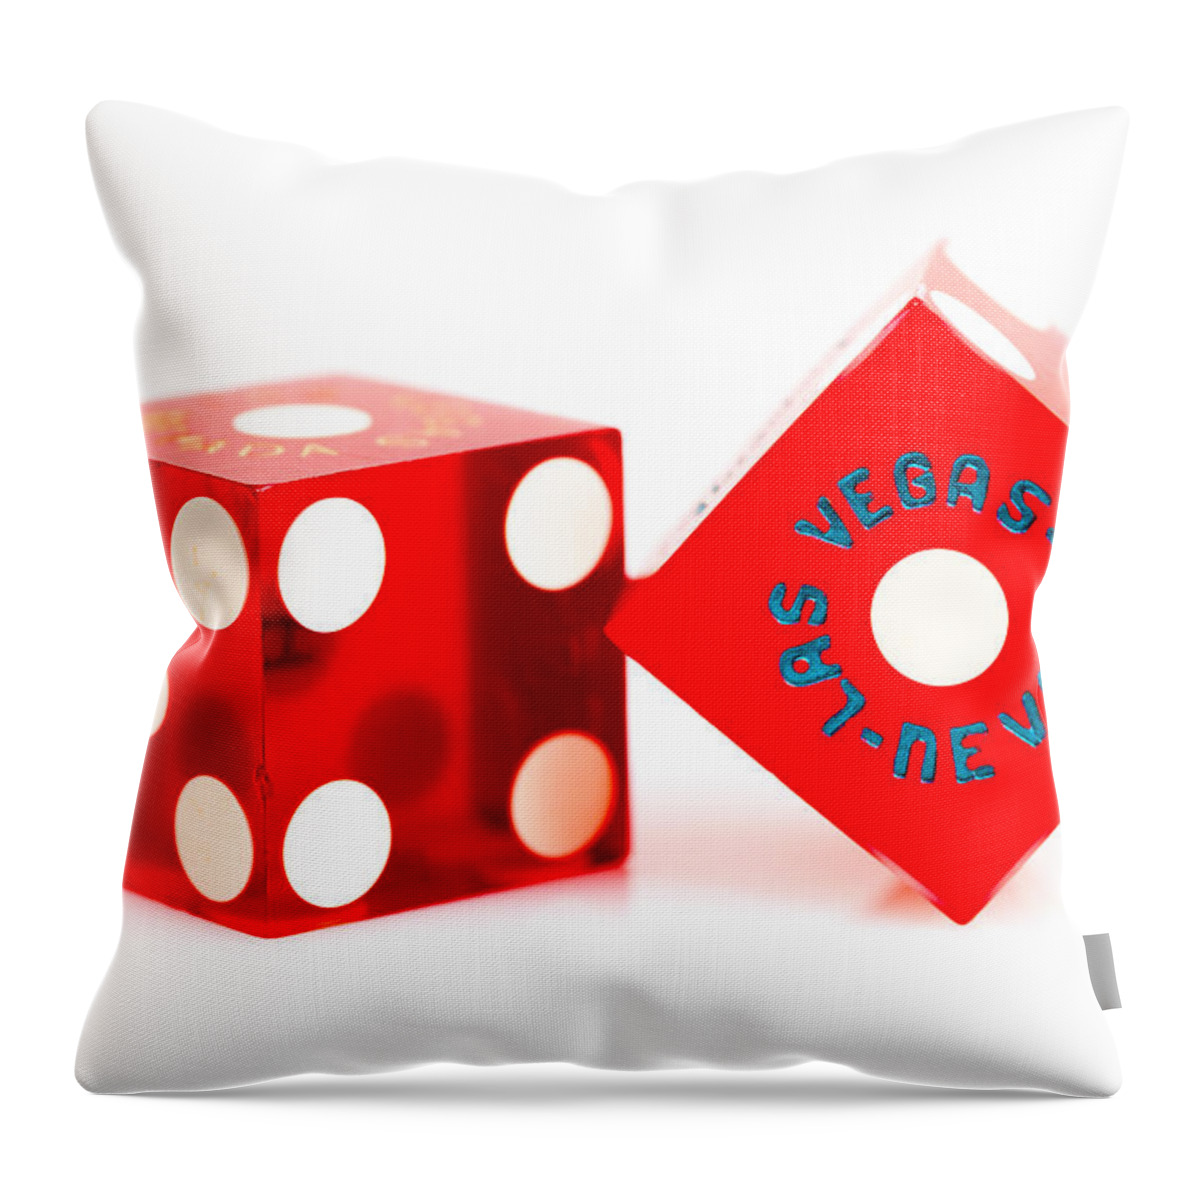 Las Vegas Throw Pillow featuring the photograph Colorful Dice by Raul Rodriguez